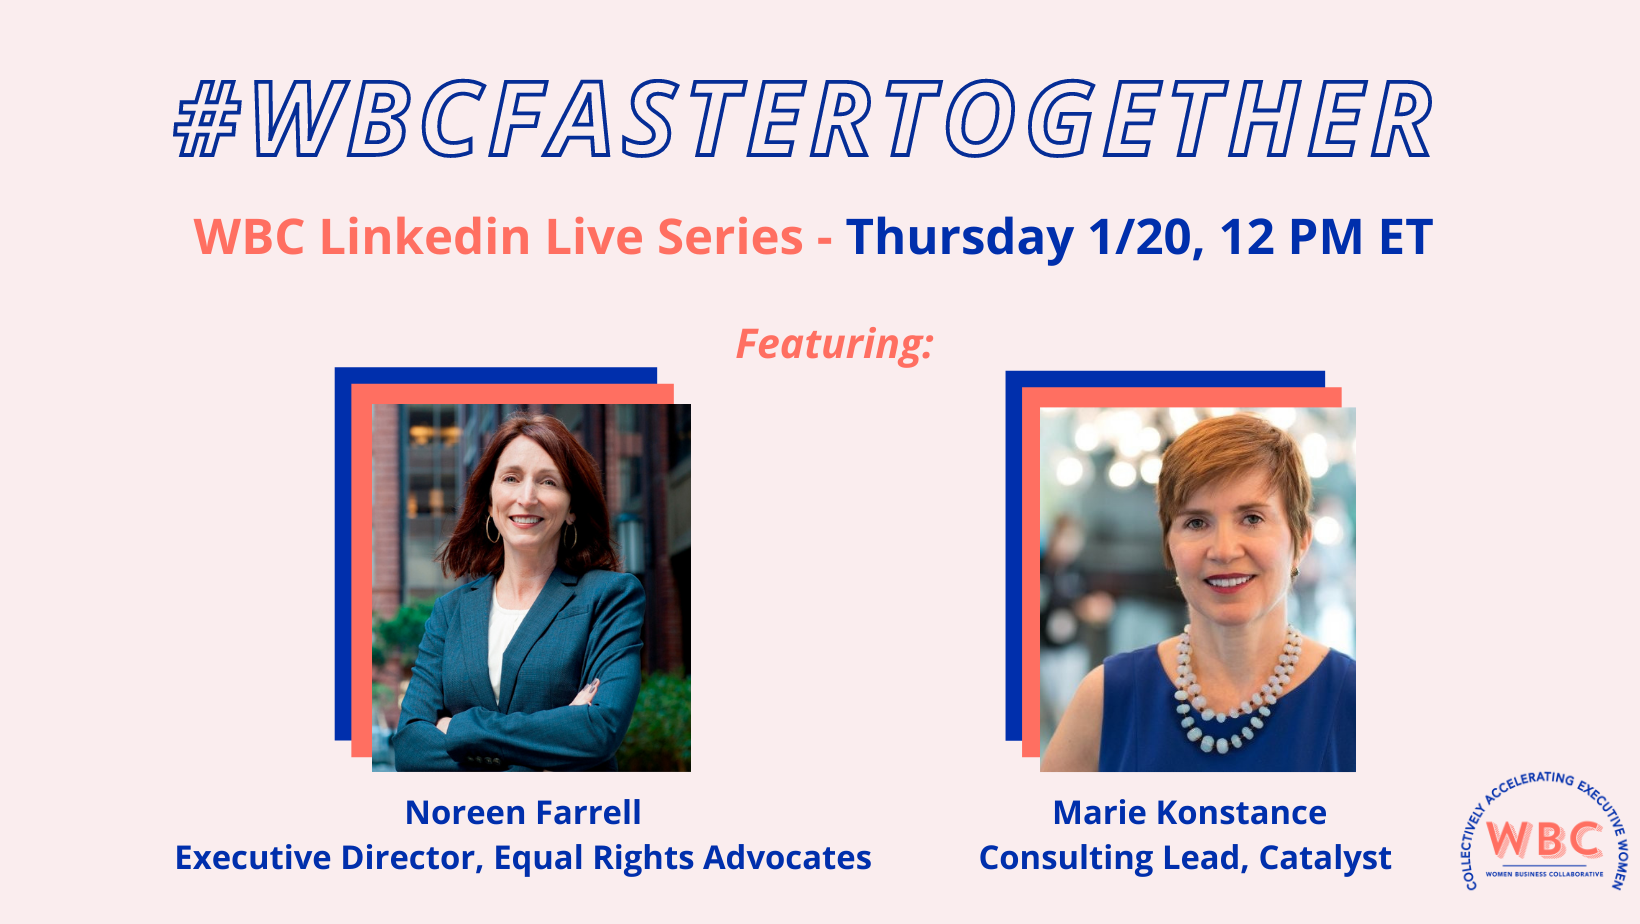 Women Business Collaborative event: Pay Parity in 2022 featuring Noreen Farrell of Equal Rights Advocates and Maria Konstance of Catalyst. Thursday January 20, 12 pm Eastern